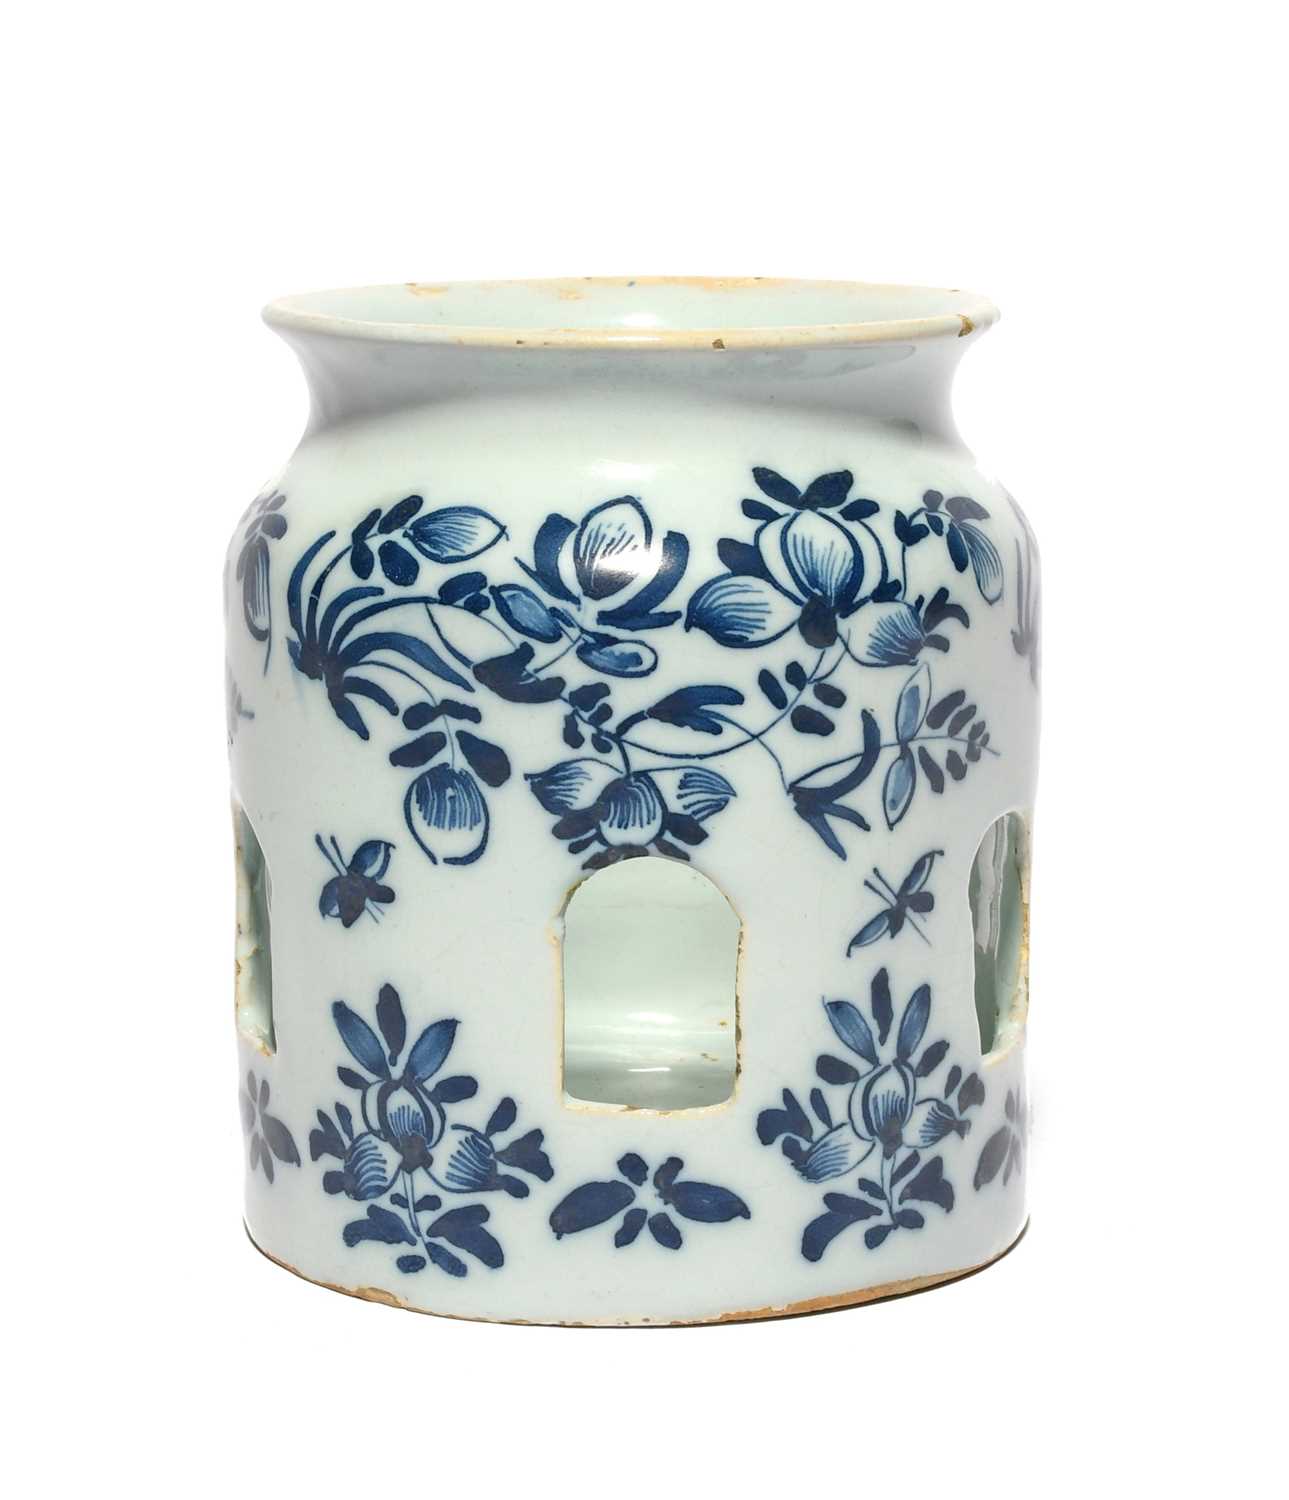 A rare English delftware night light holder, c.1770, probably London, the cylindrical jar shape with